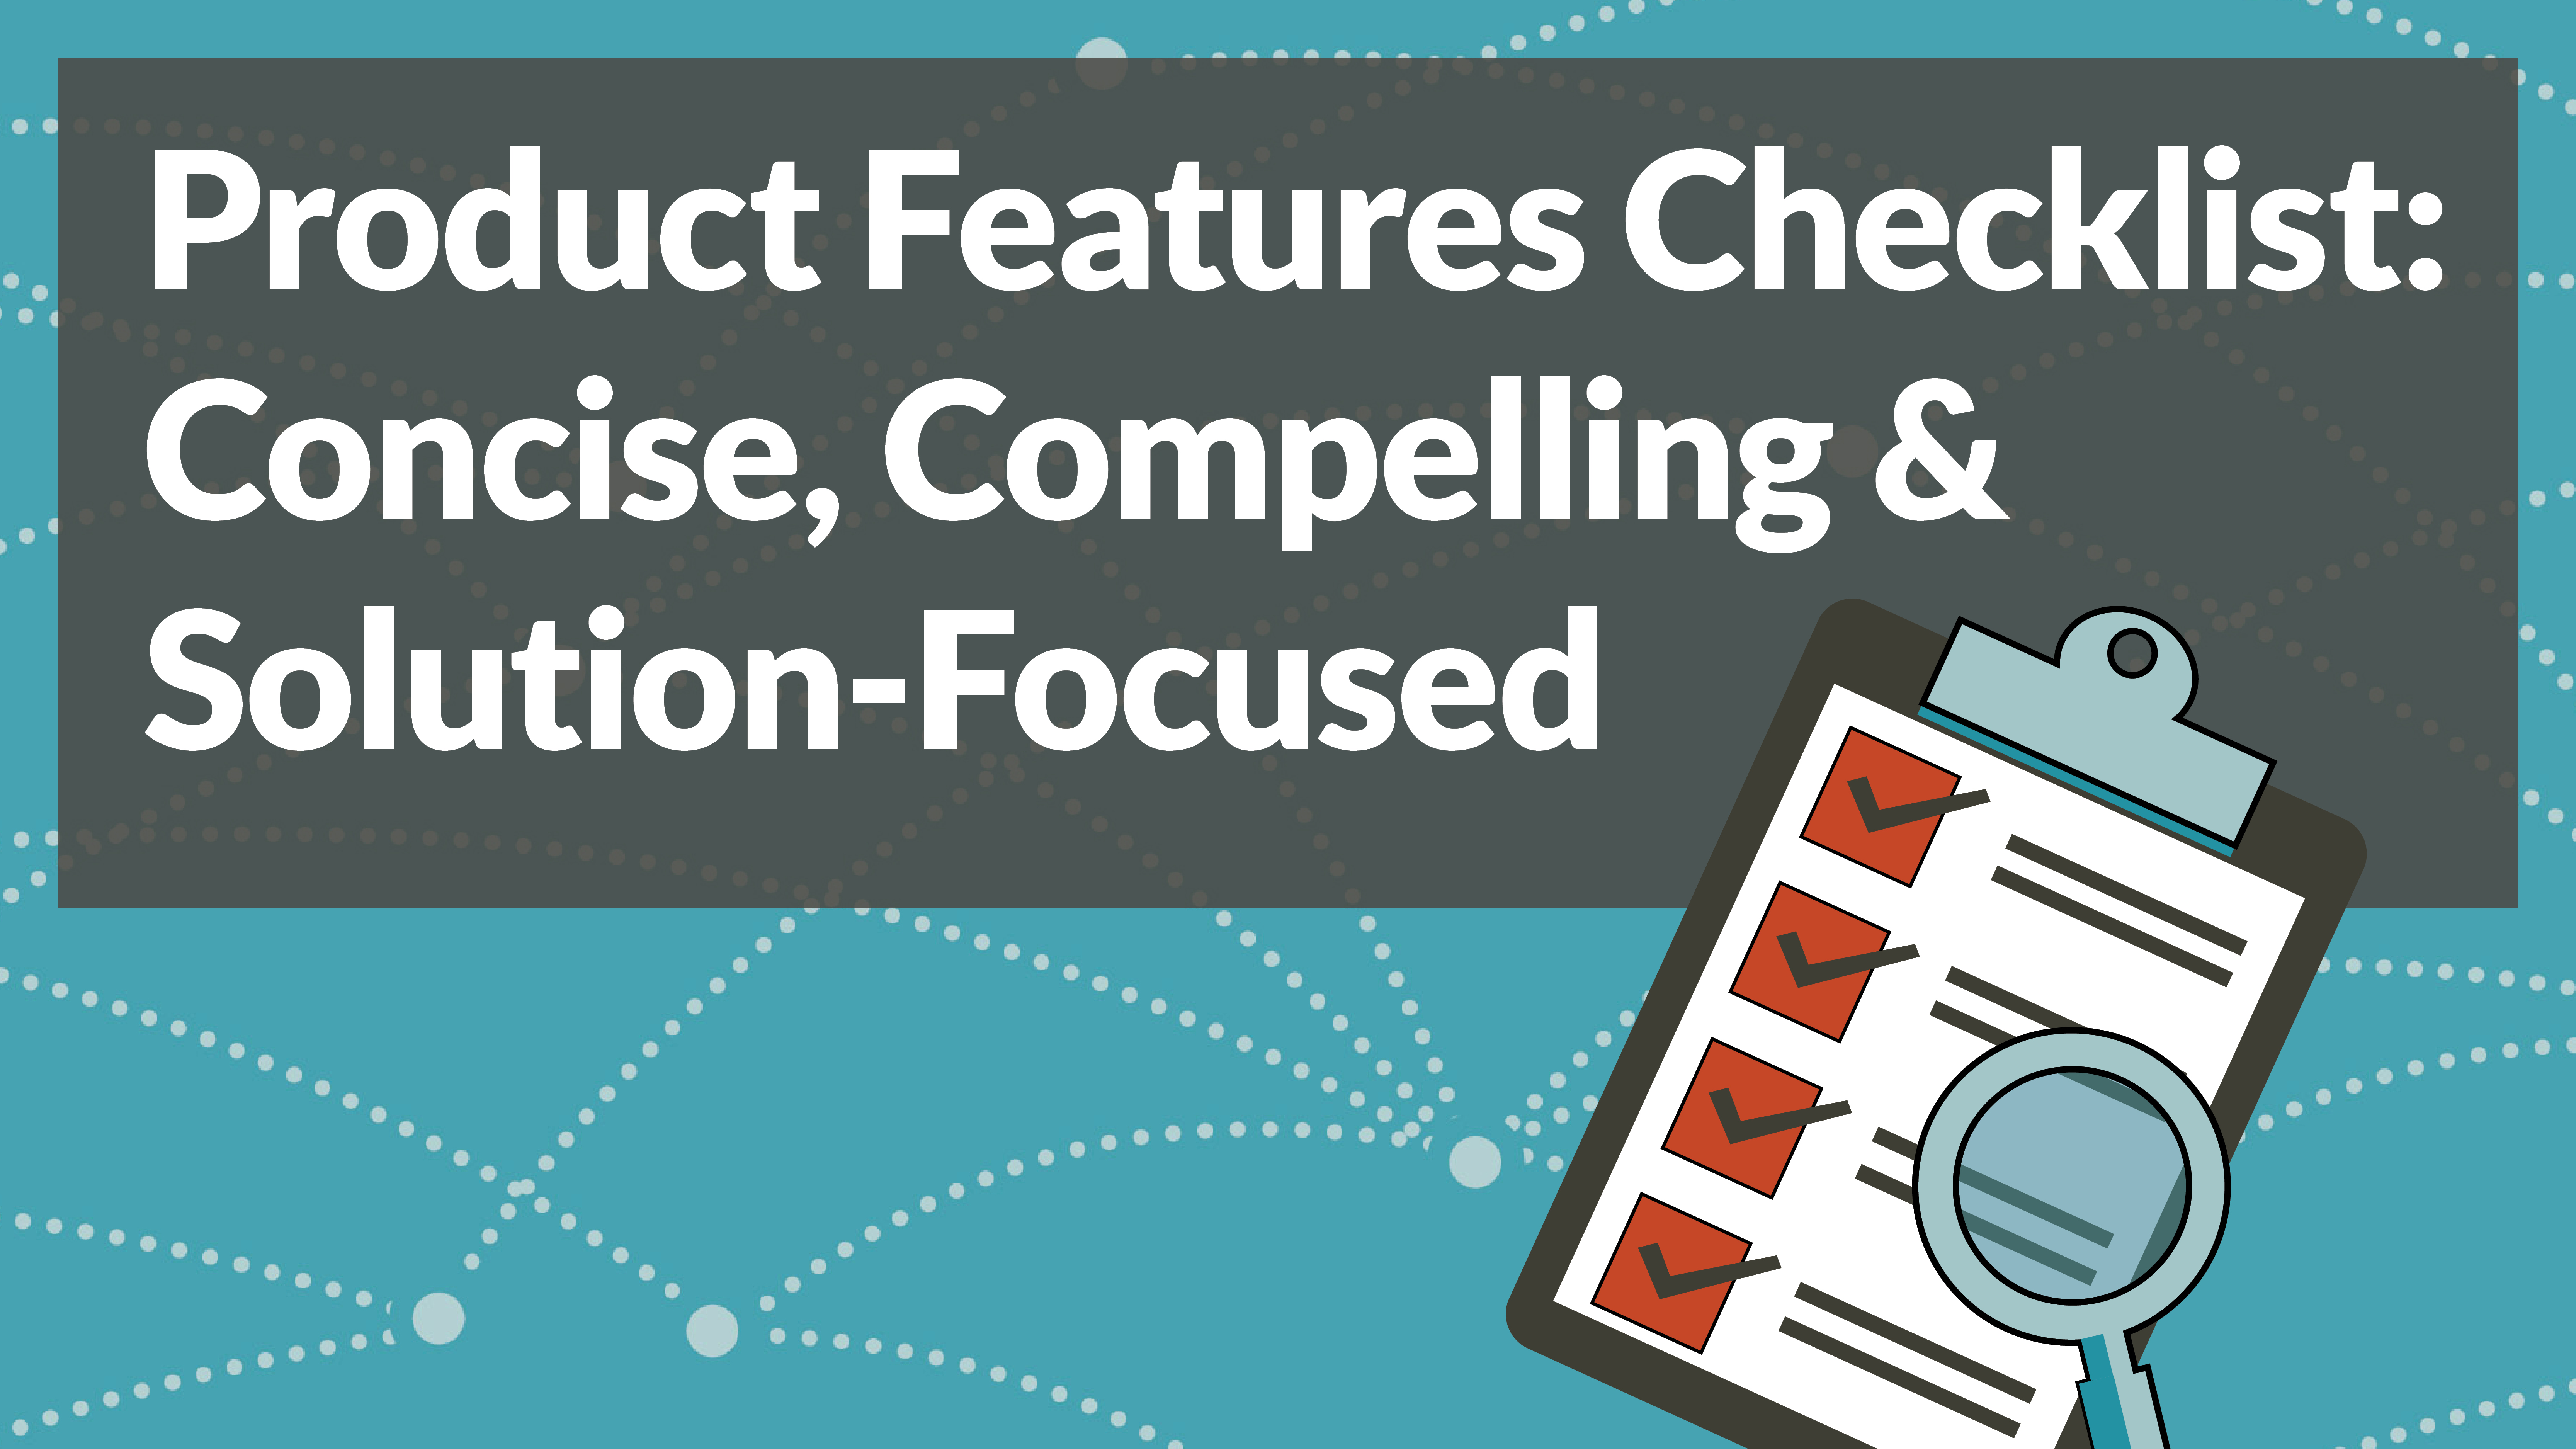 Your Content Creation Checklist For Writing Product Features Sheets